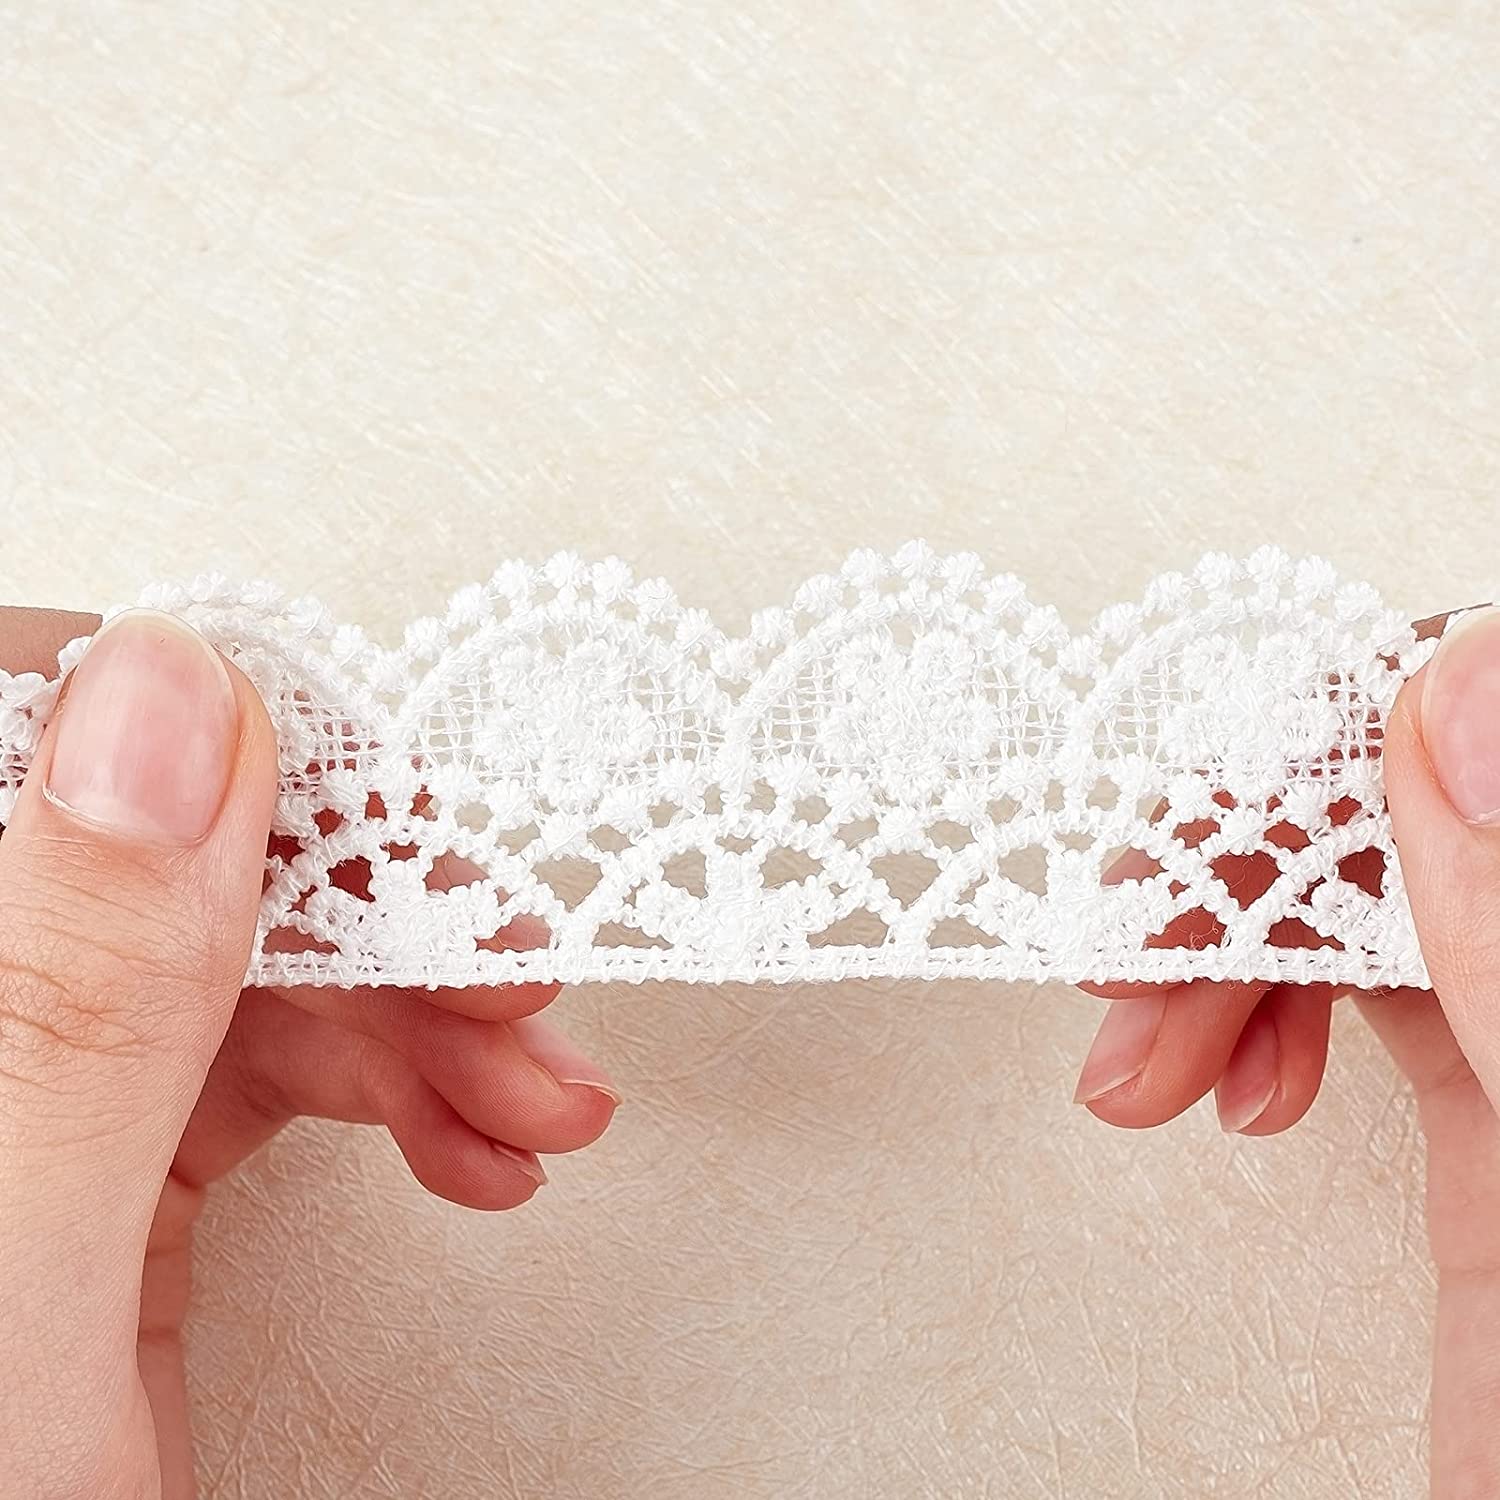 20 Yards 1.26/32mm Wide Polyester Lace Trim Vintage Lace Ribbon Crochet Lace Scalloped Edge for Bridal Wedding Decoration Christmas Package DIY Sewing Craft Supply (White)